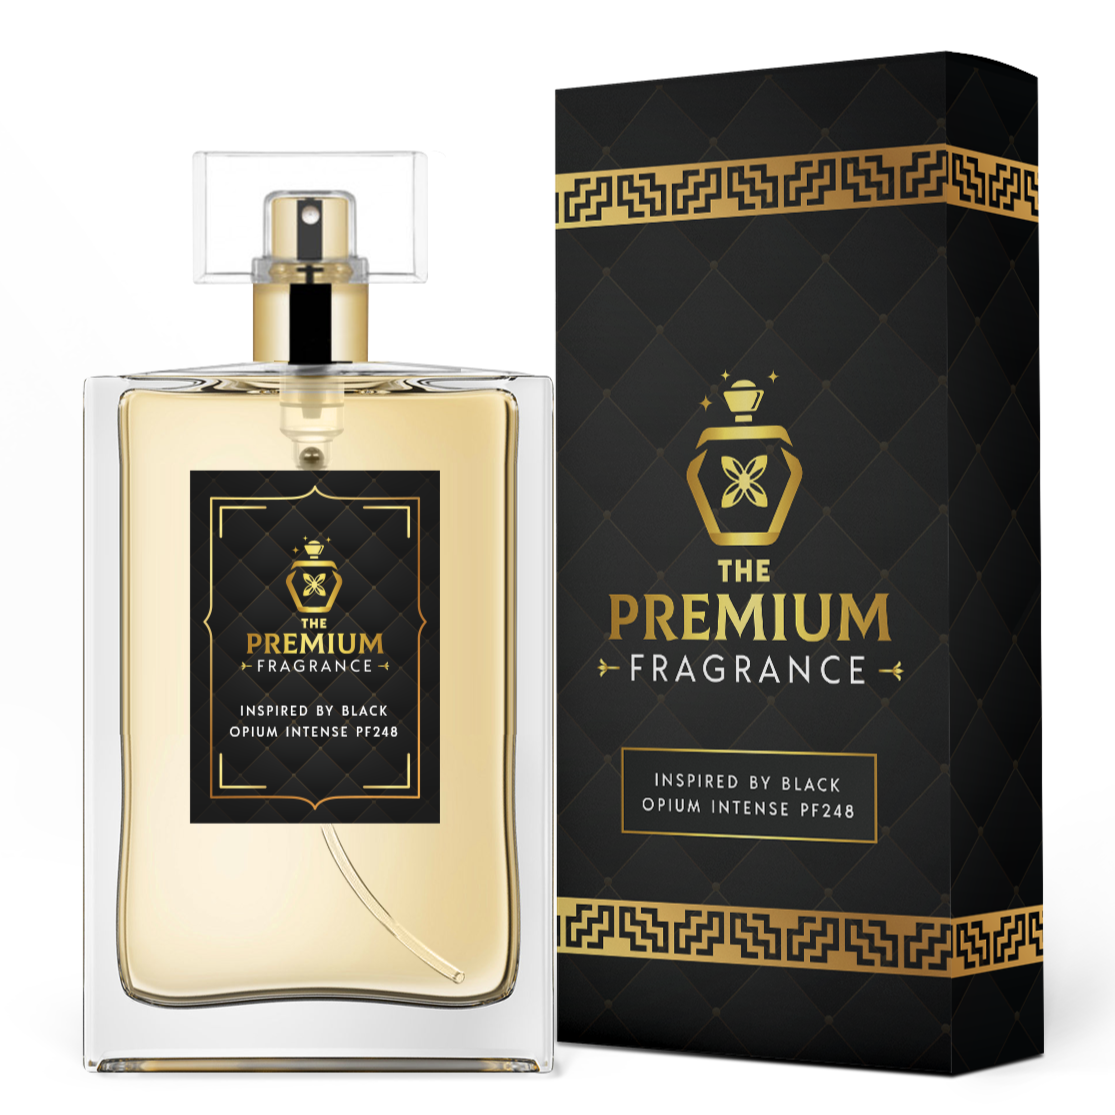 black opium perfume, inspired by version, long lasting scent for women